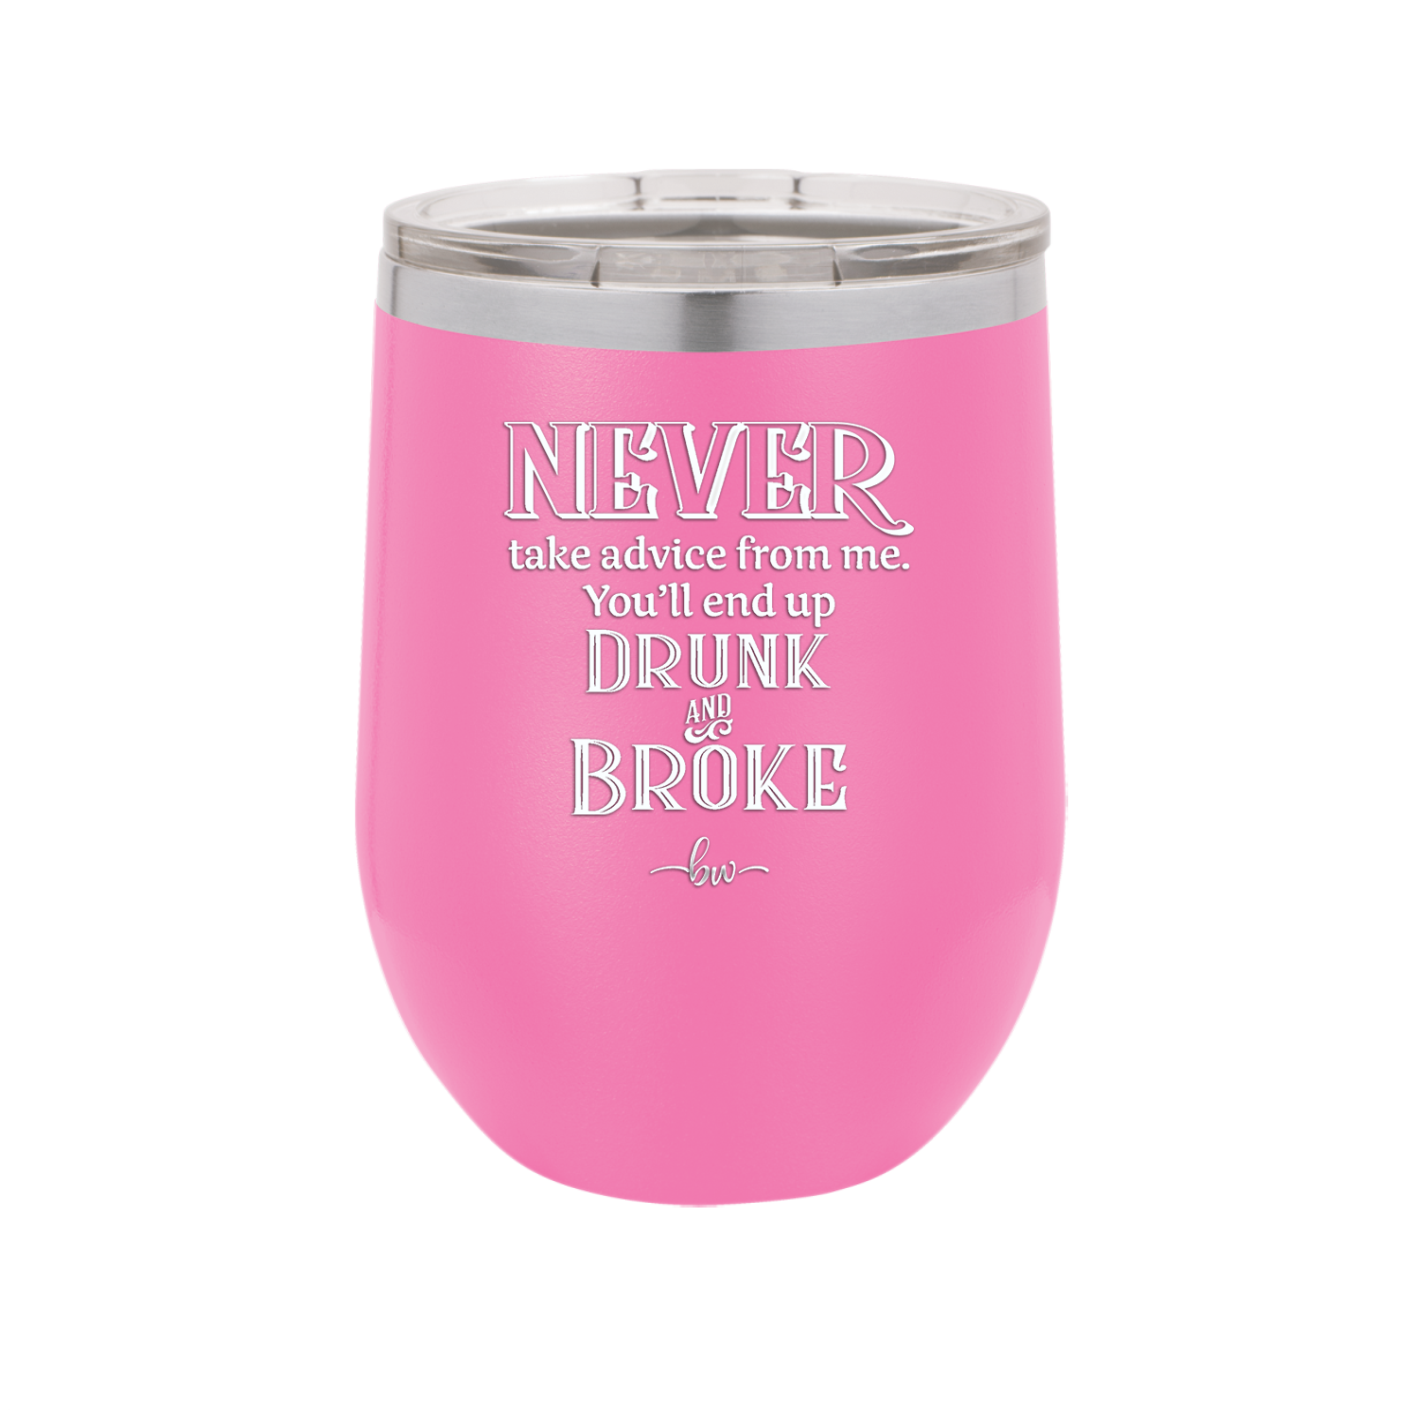 Never Take Advice From Me You'll End Up Drunk and Broke- Laser Engraved Stainless Steel Drinkware - 1326 -